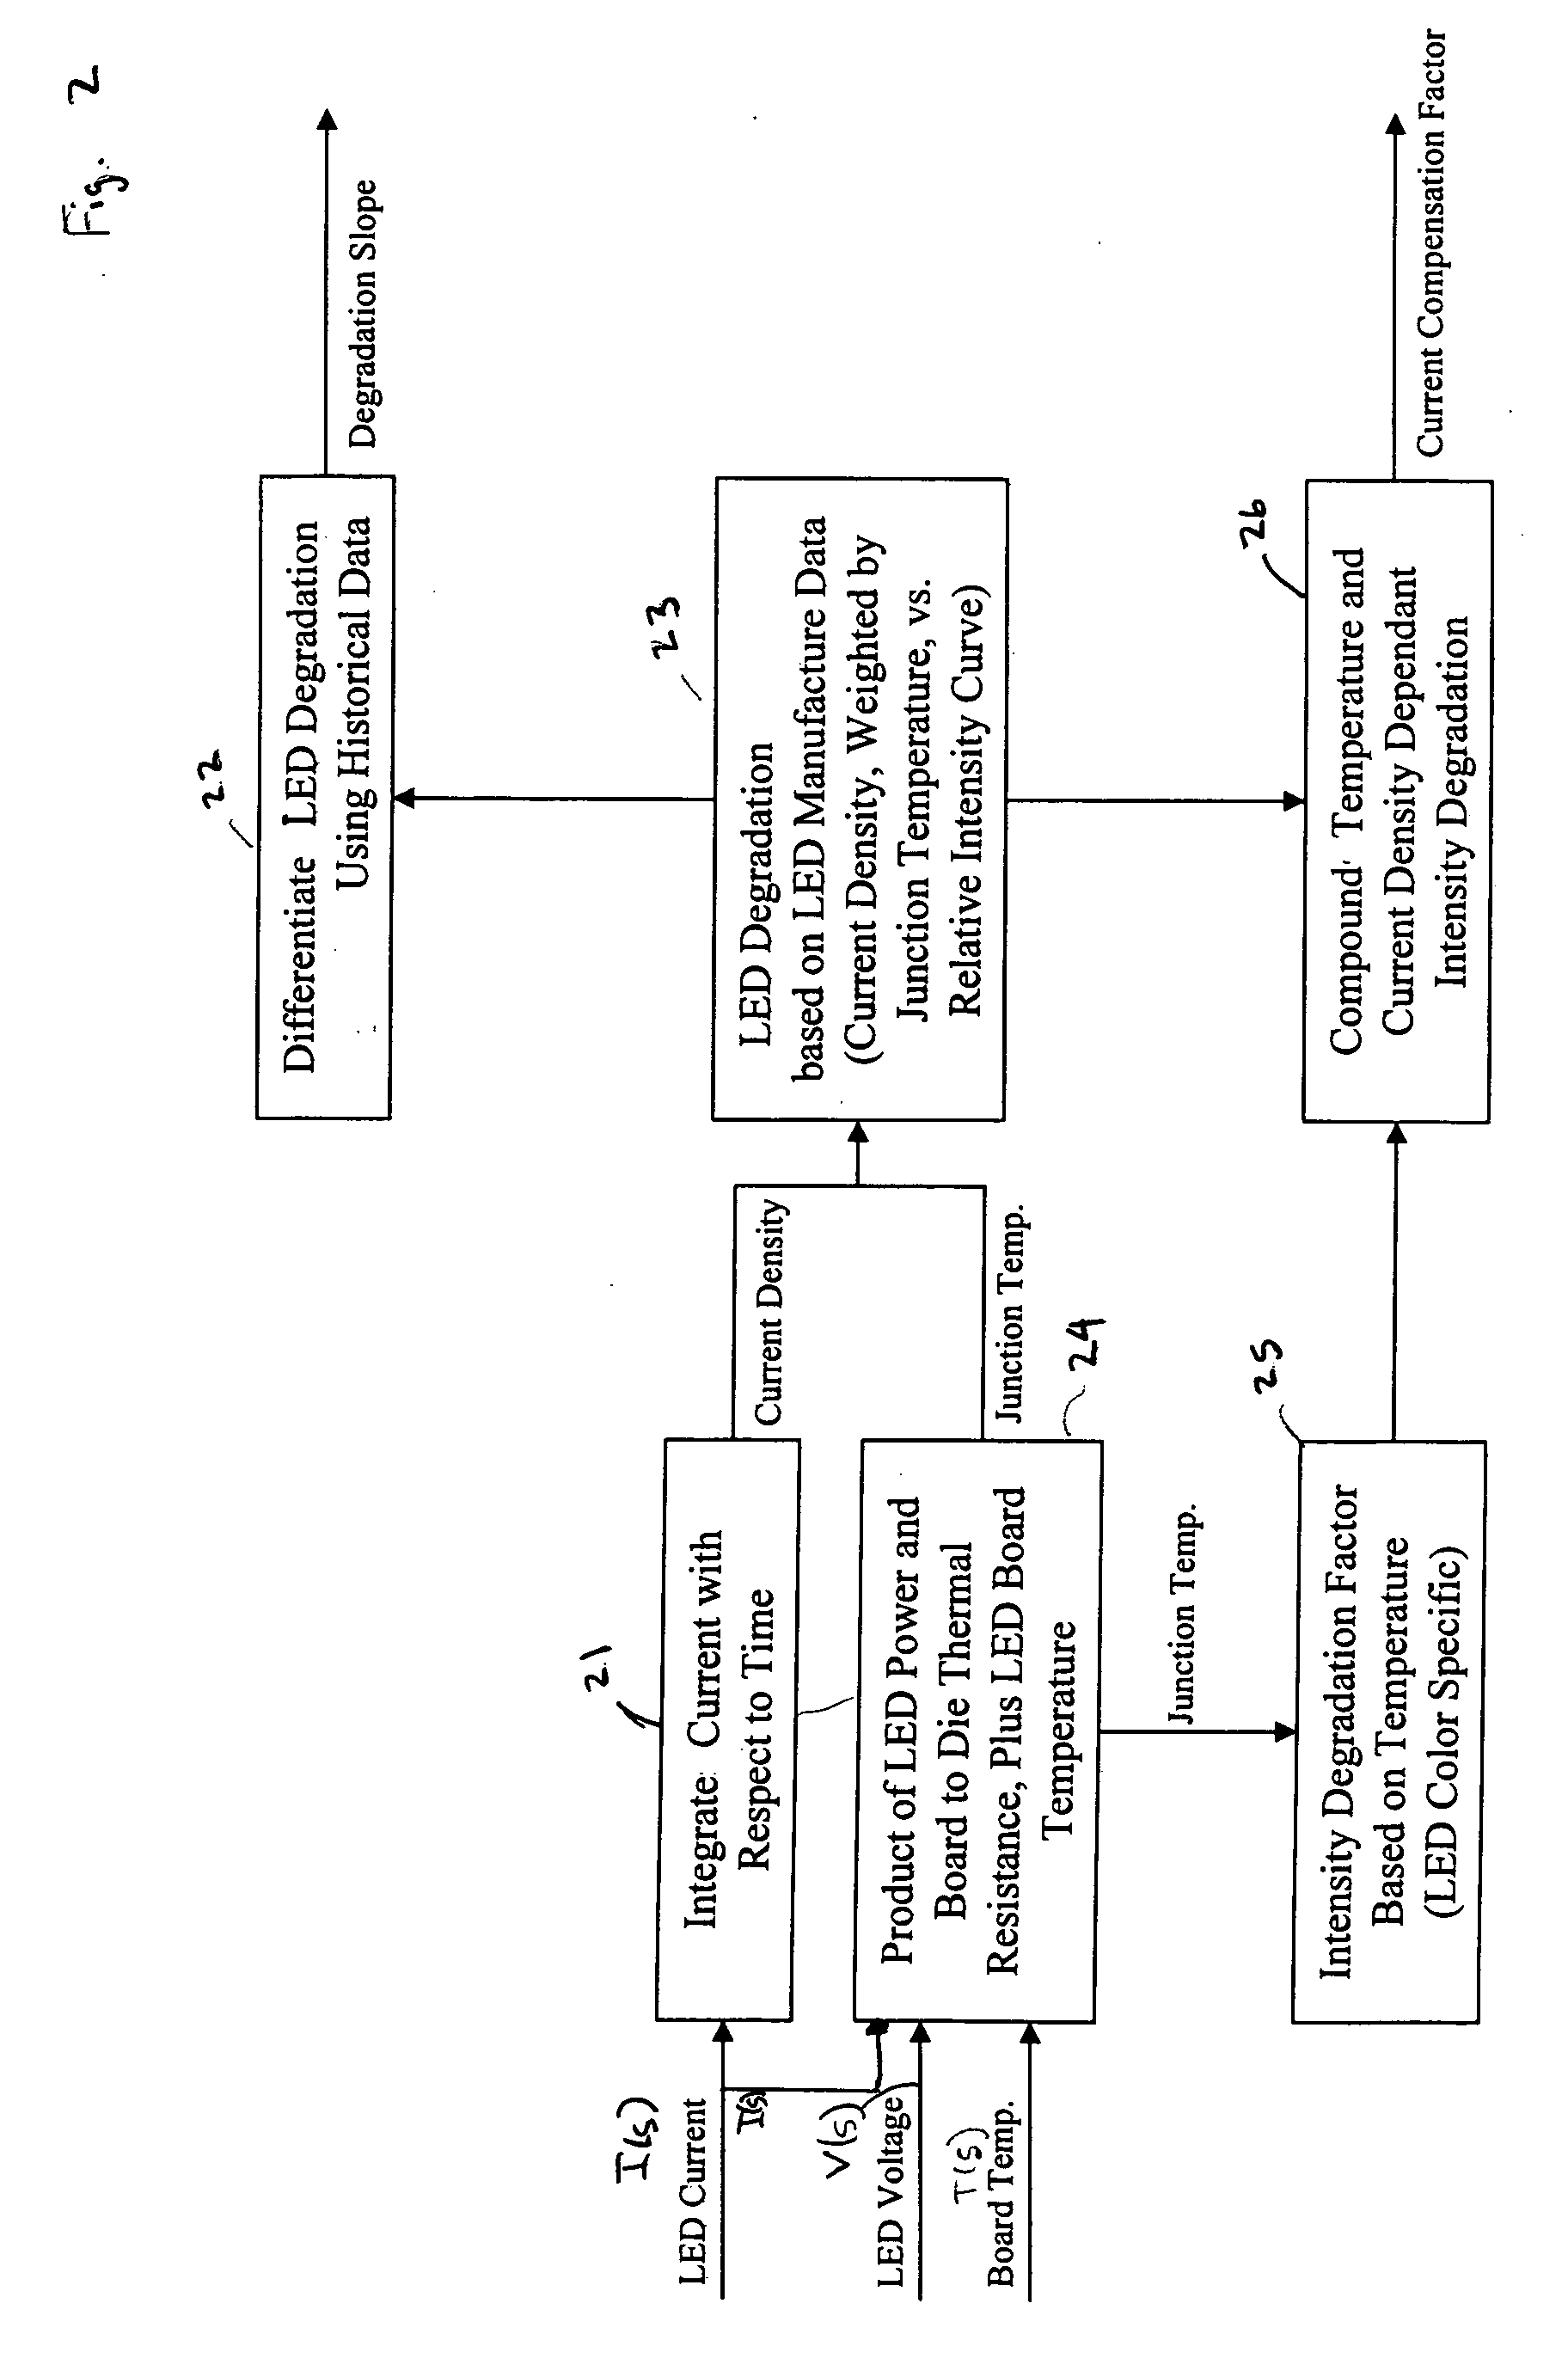 Intelligent drive circuit for a light emitting diode (LED) light engine